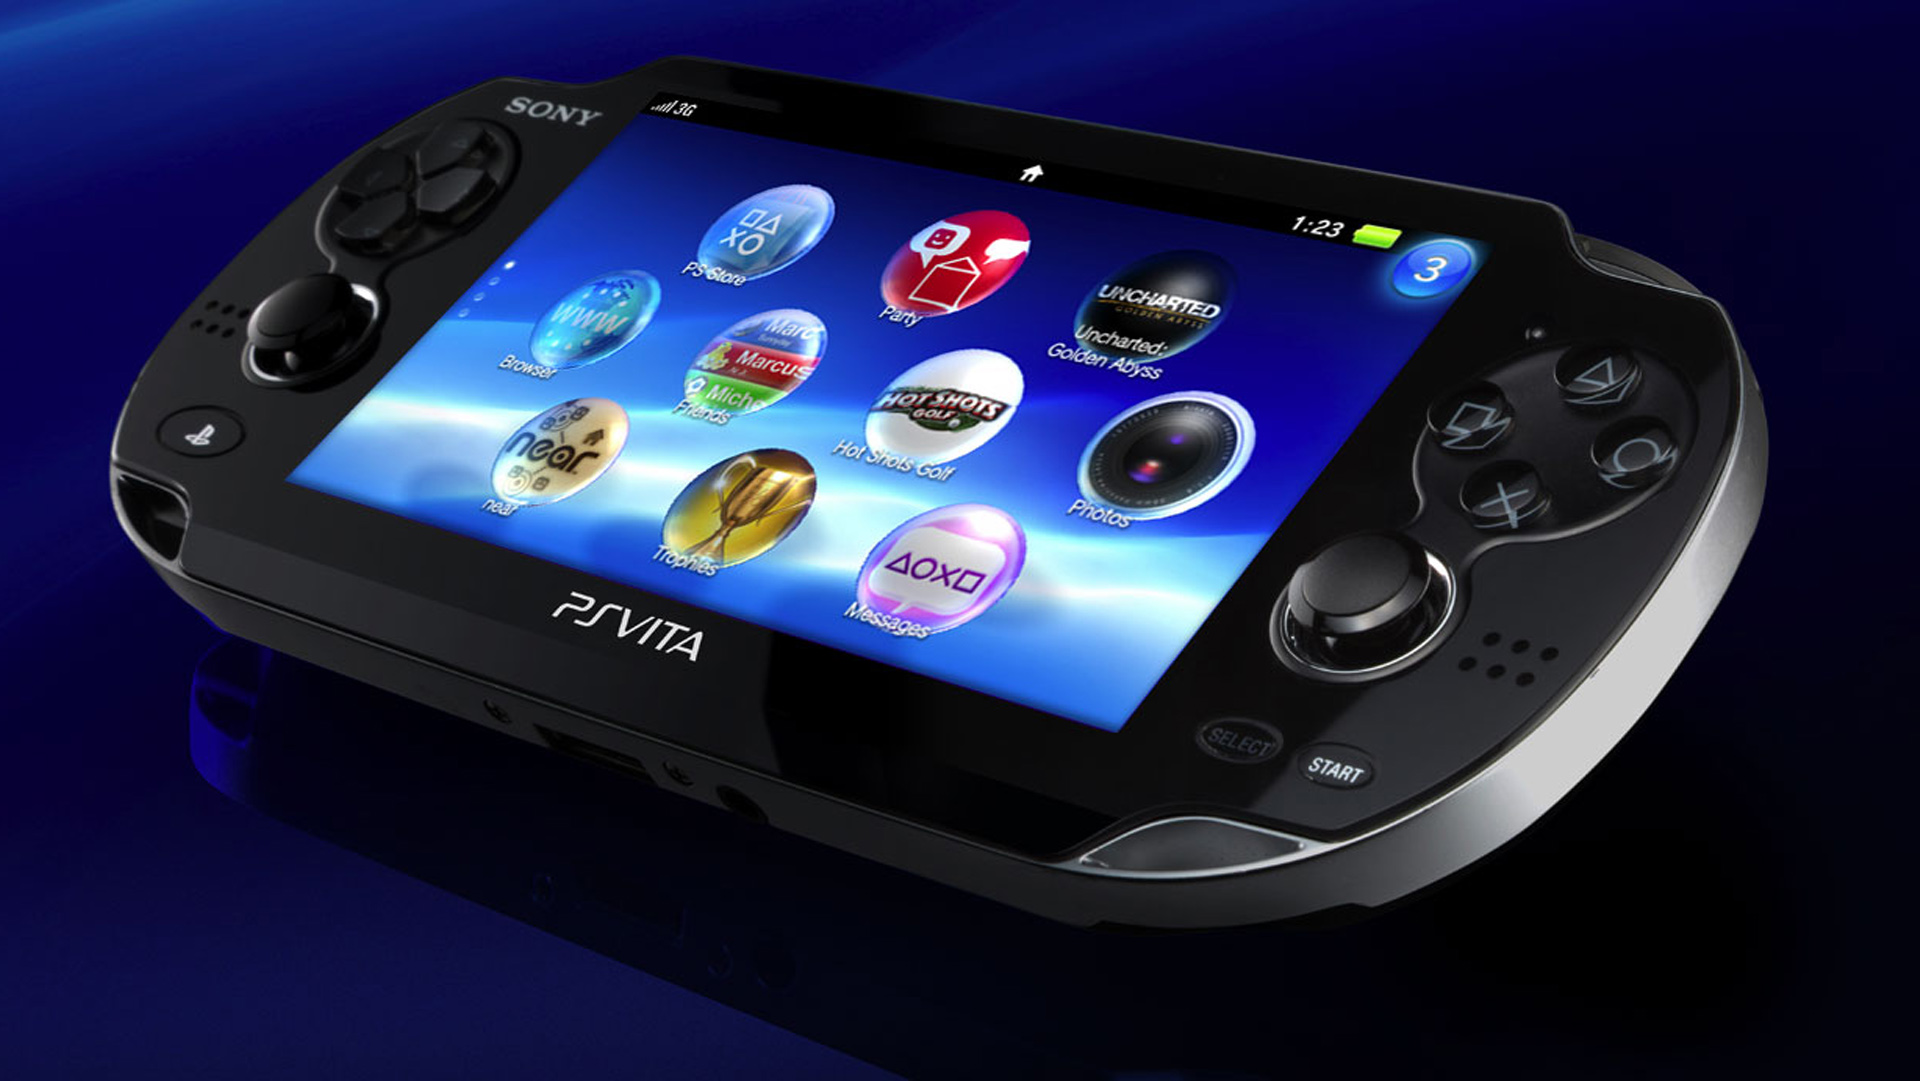 First Party Titles Not Being Developed for PS Vita - Focus Is More on PS4 Now